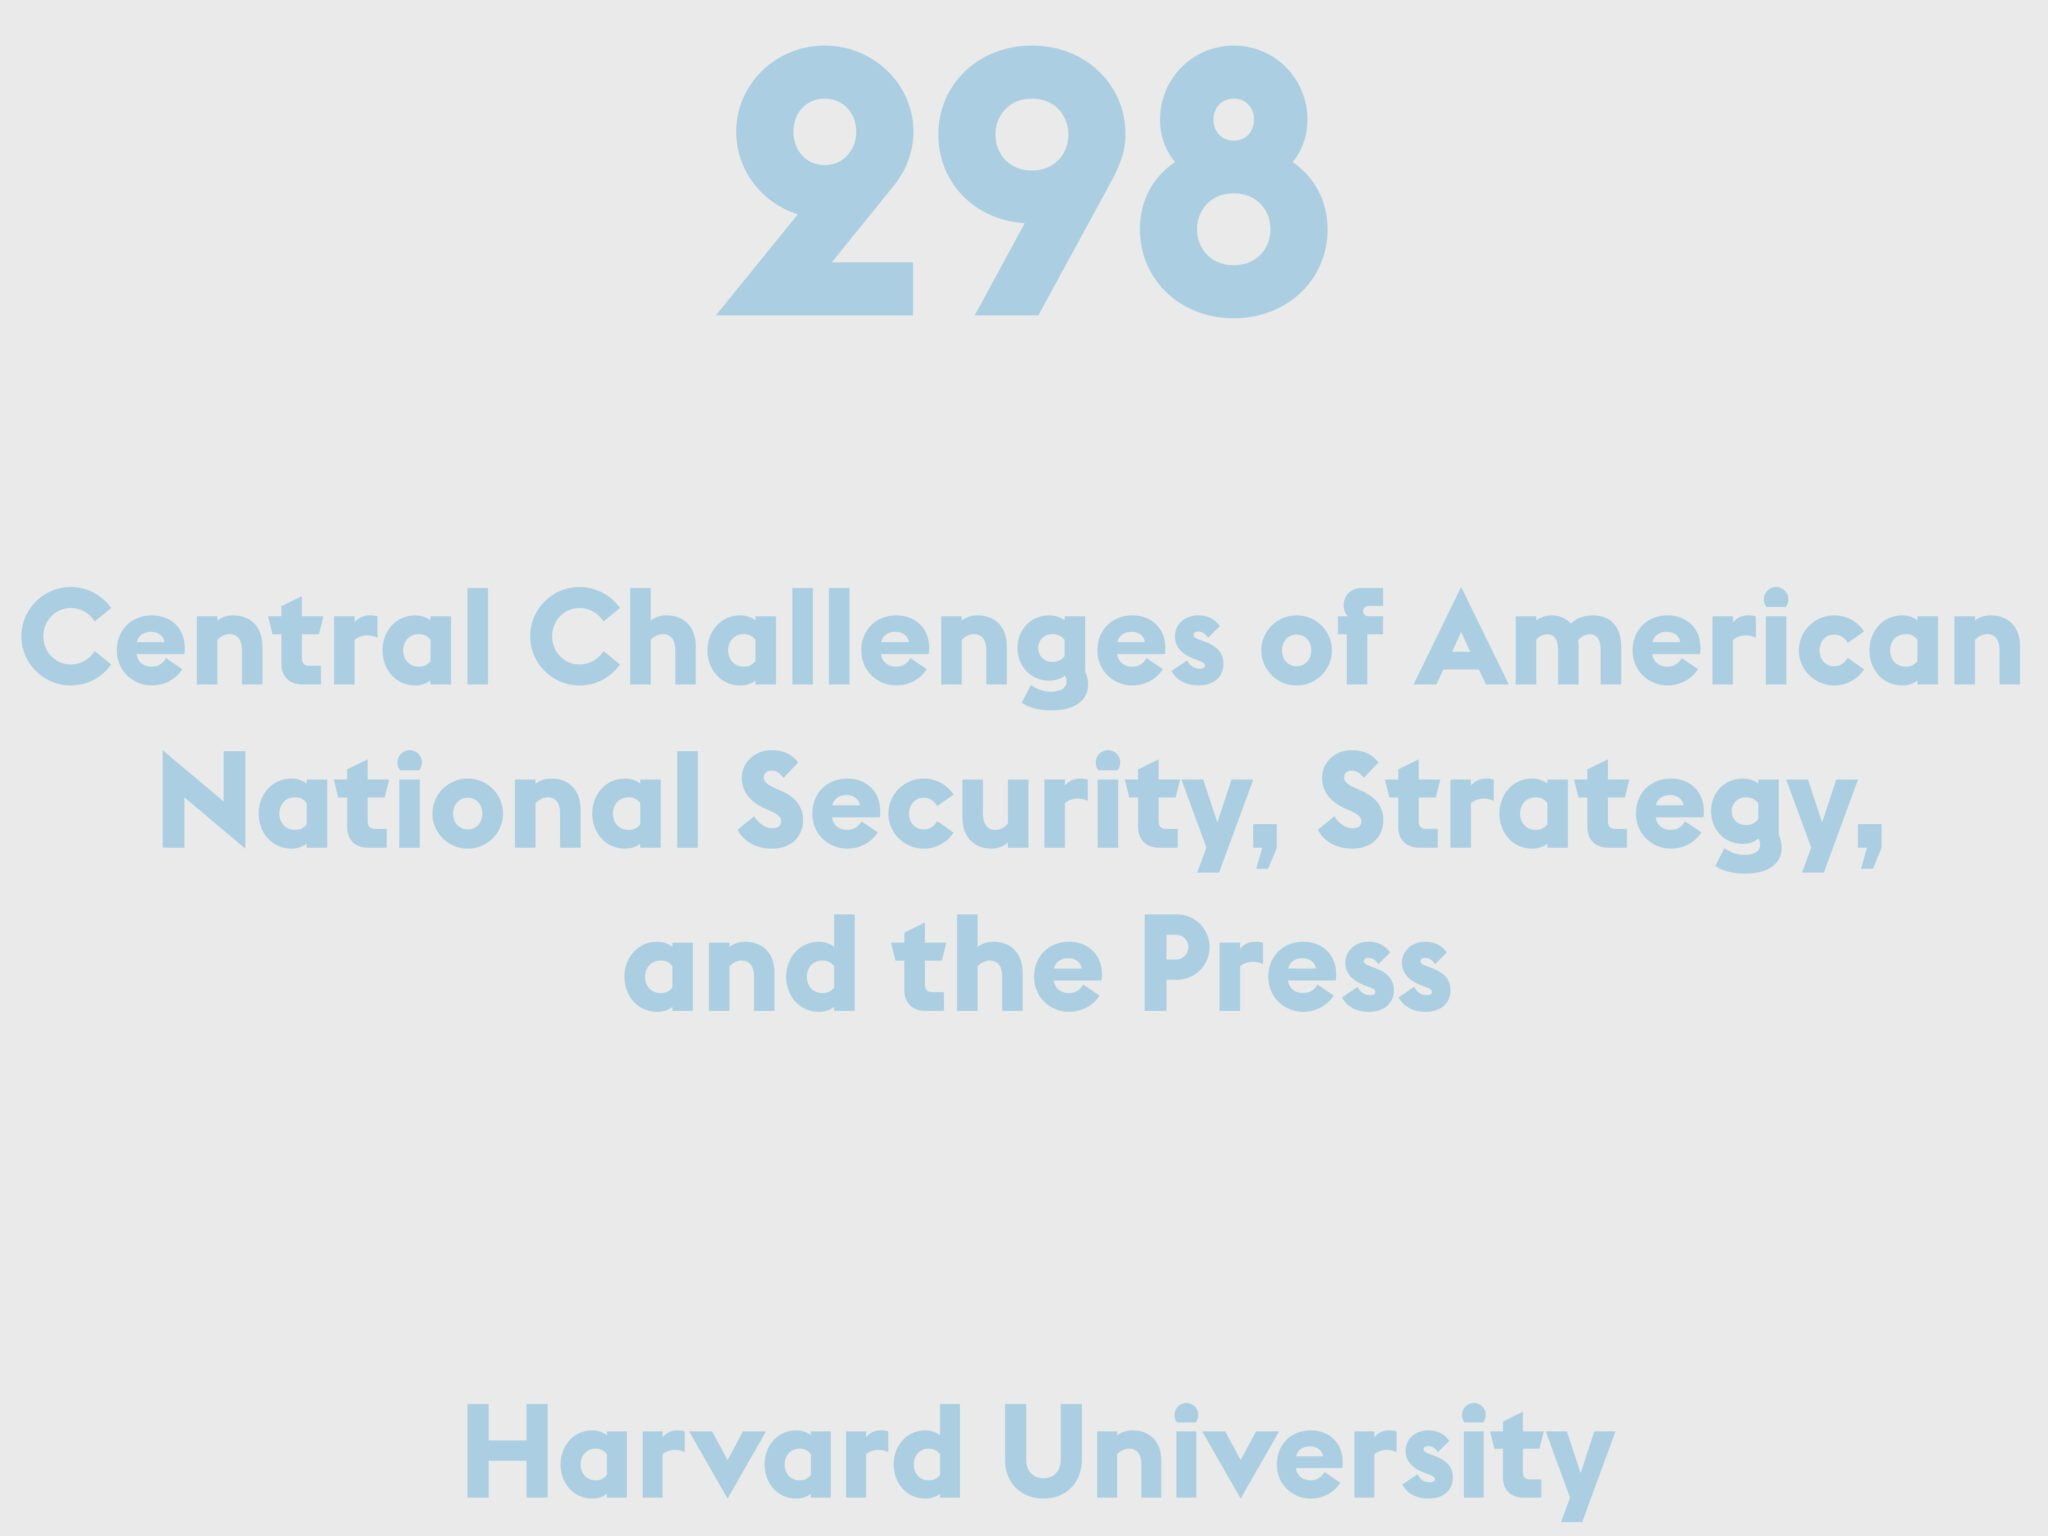 Central Challenges of American National Security